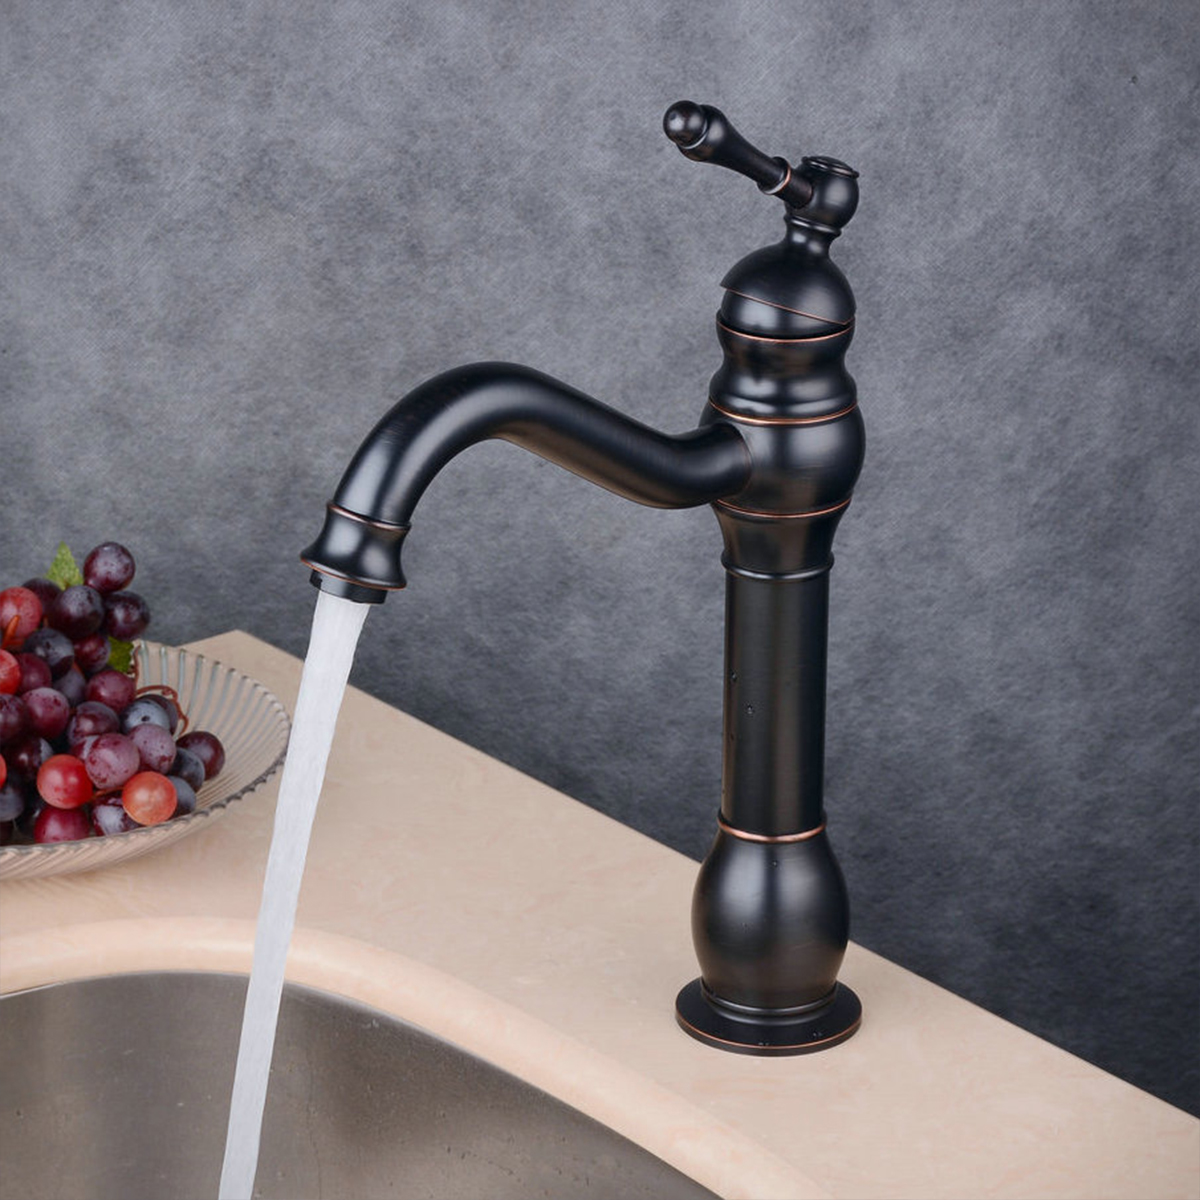 Oil Rubbed Bronze Vessel Sink Faucet Bathroom 360 Degree Swivel Single Lever Handle Bowl One Hole Tap Mixer